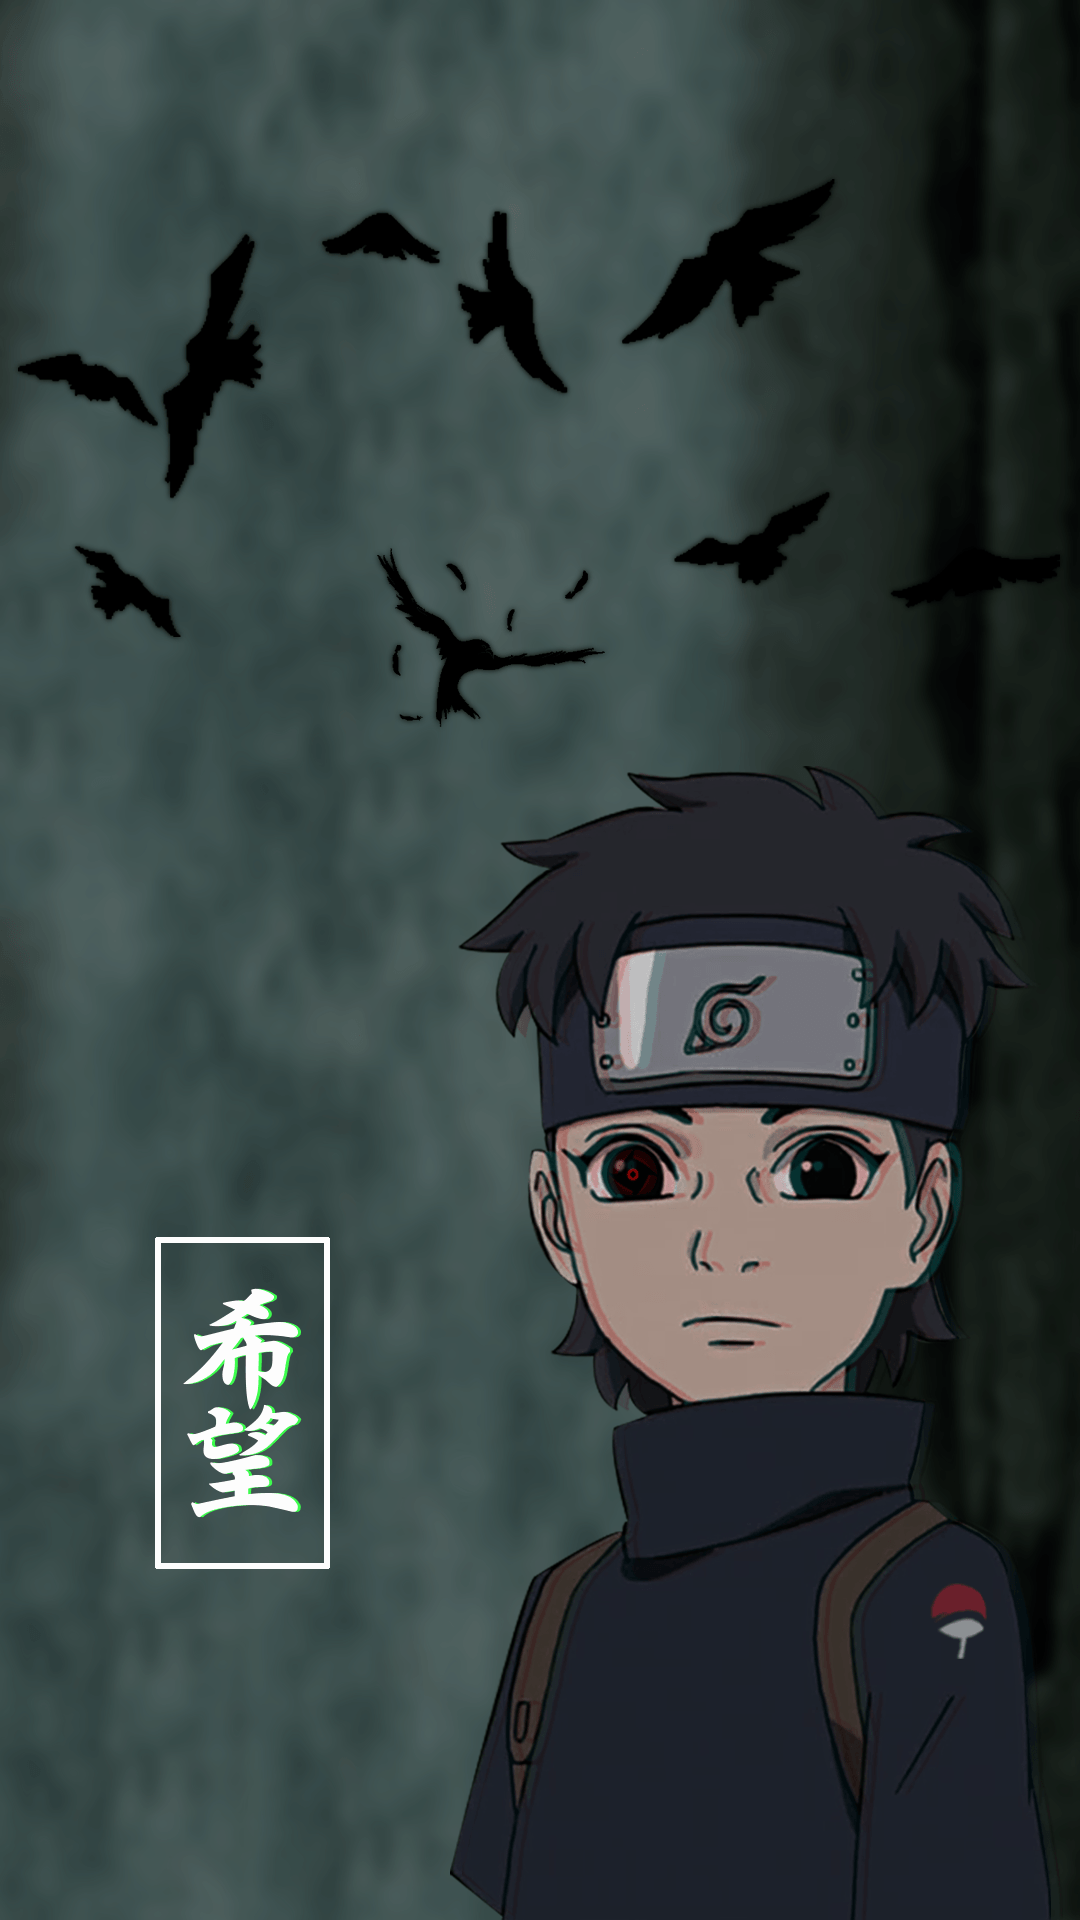 Took a while but here's a Shisui wallpaper. Naruto shippuden anime